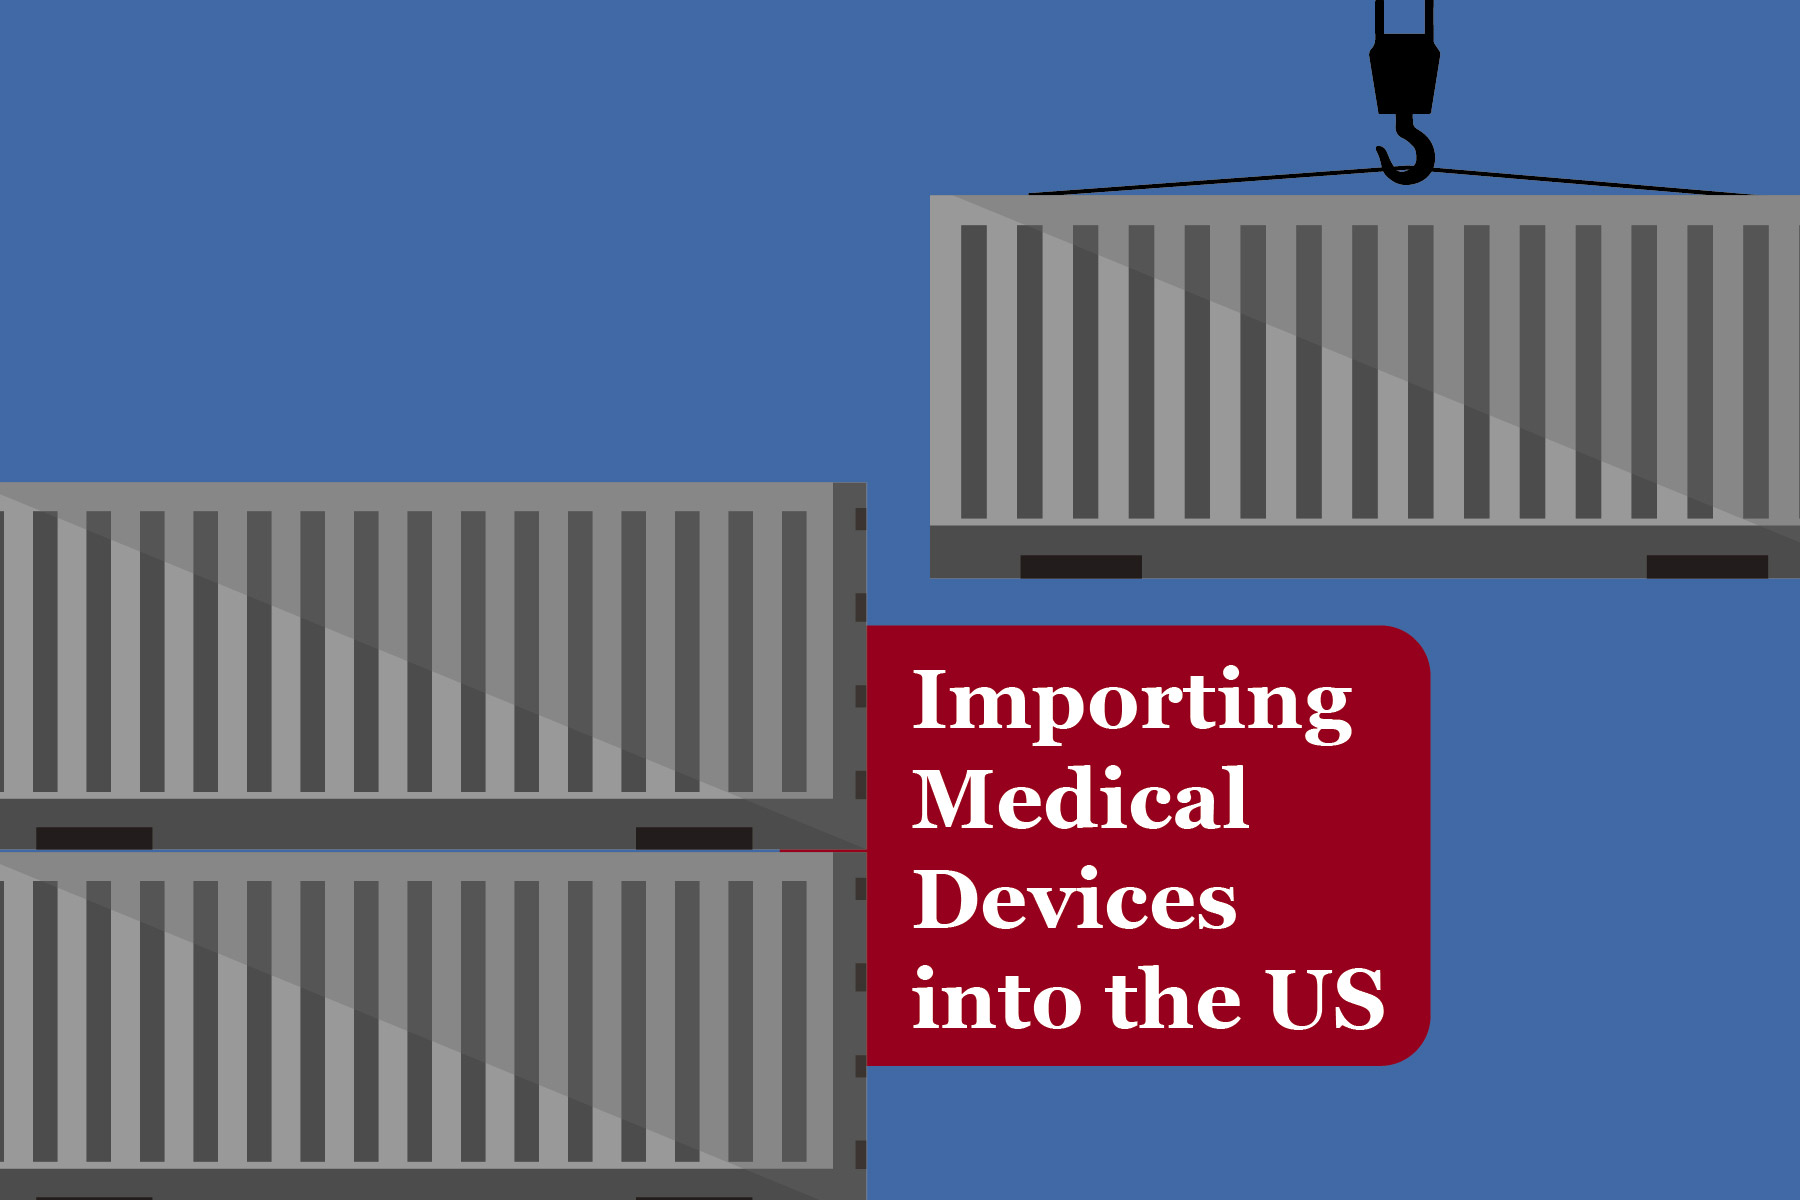 The importing of Medical Devices by shipping containers in the US